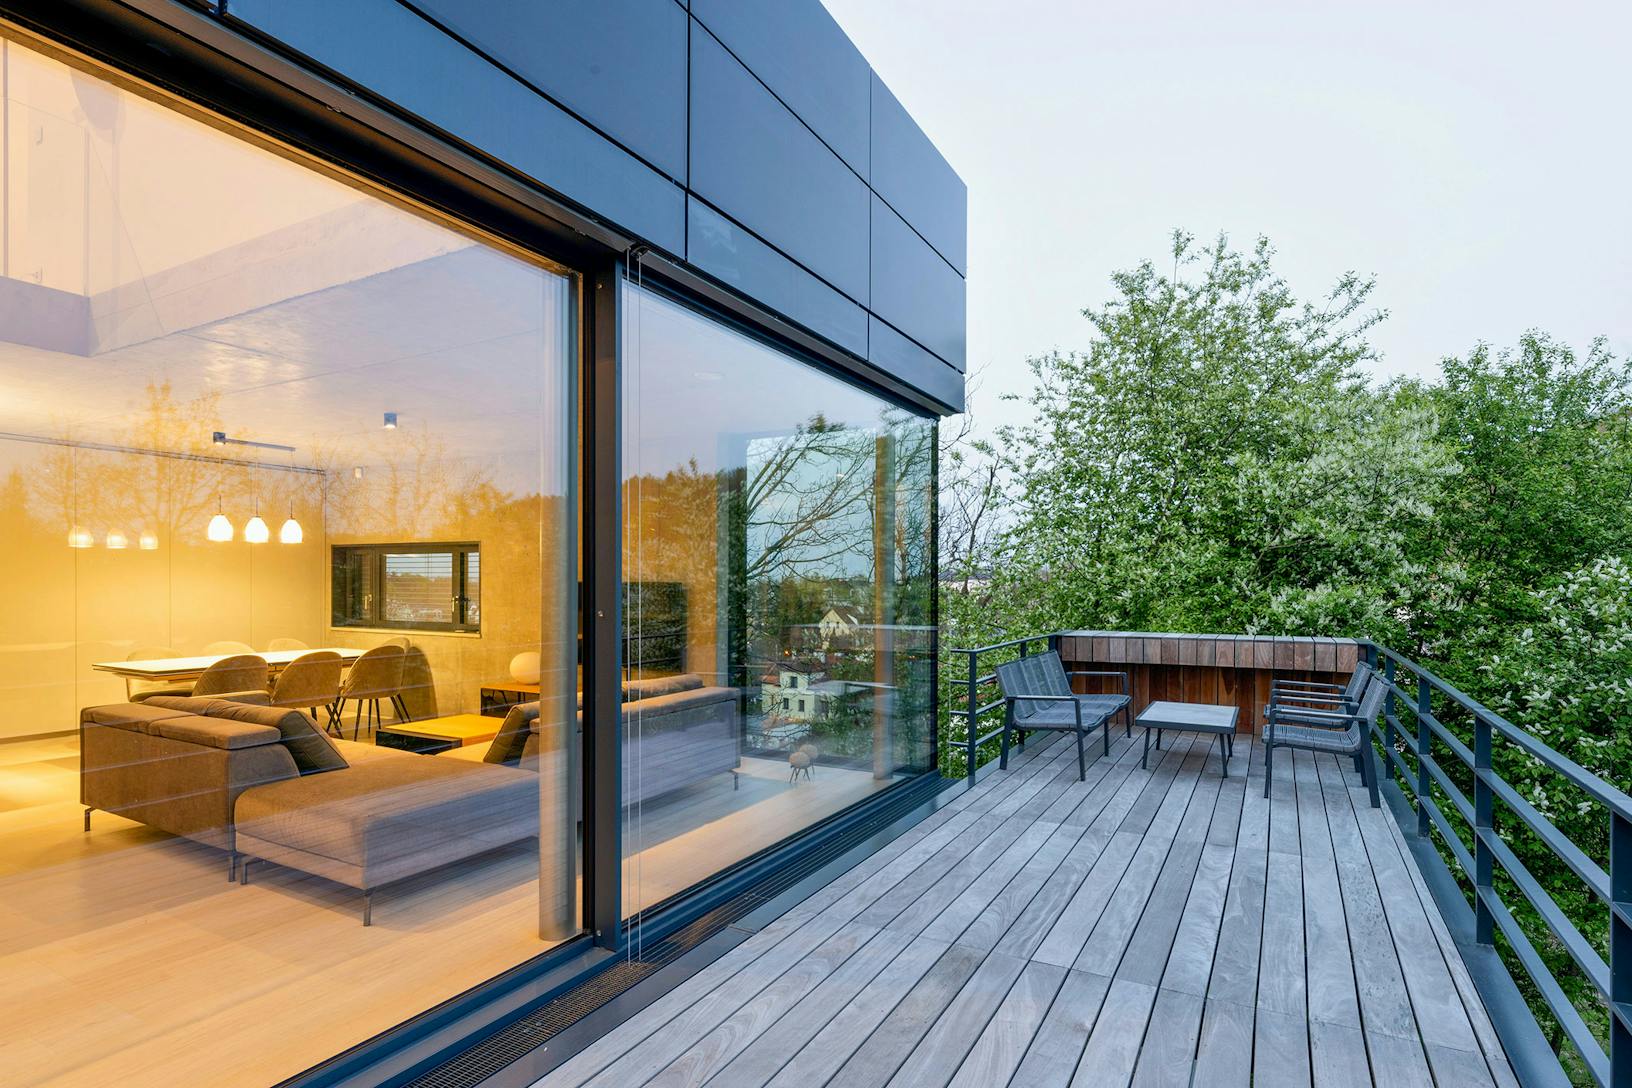 A modern house with a wooden deck and large opening glass walls